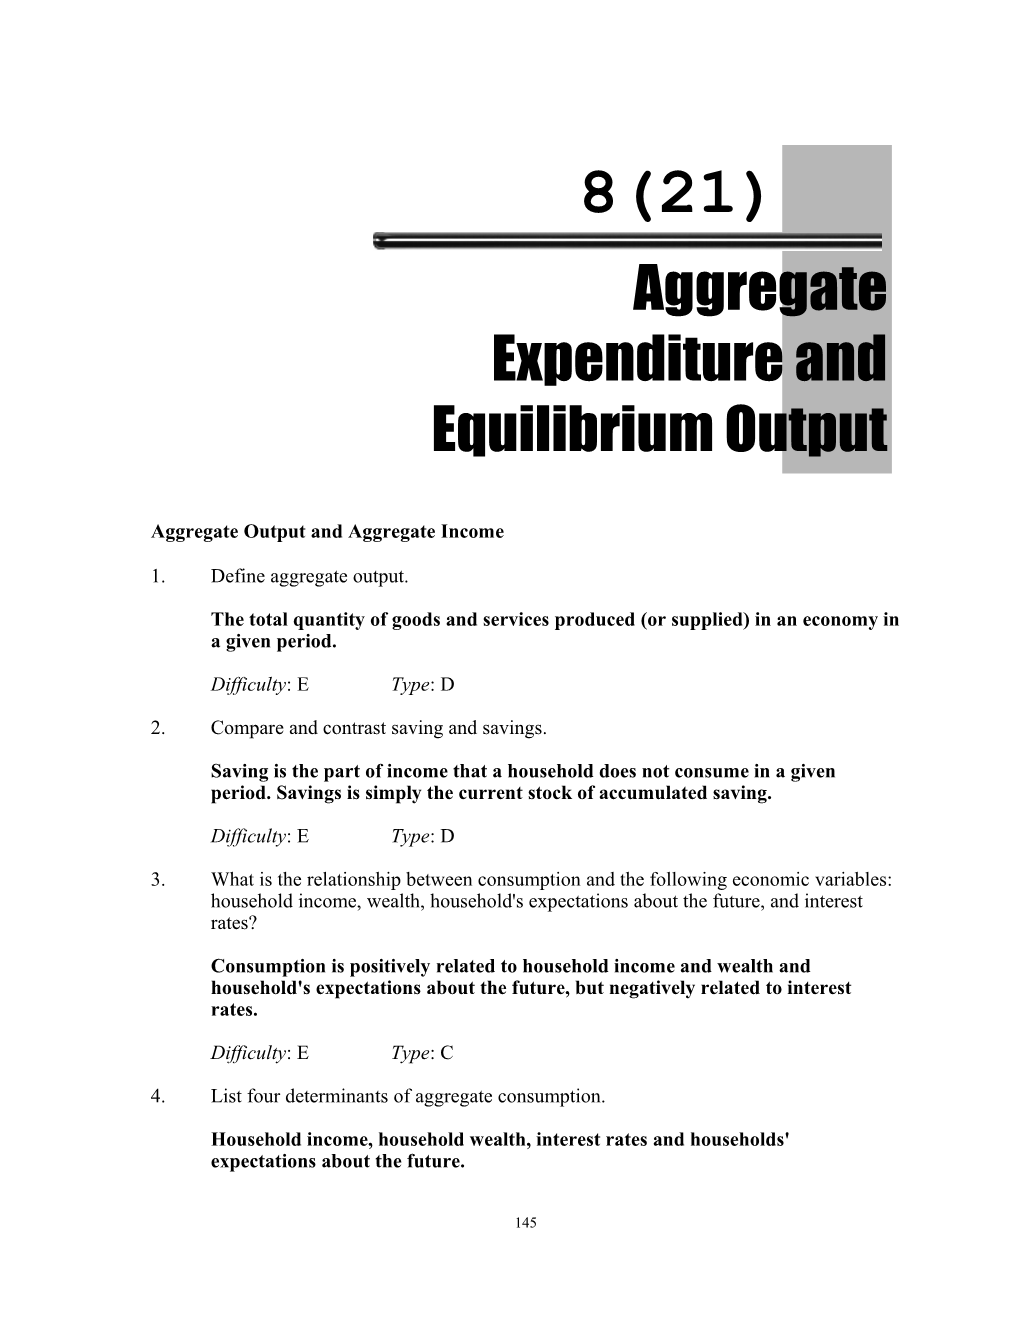 Chapter 8 (21): Aggregate Expenditure and Equilibrium Output